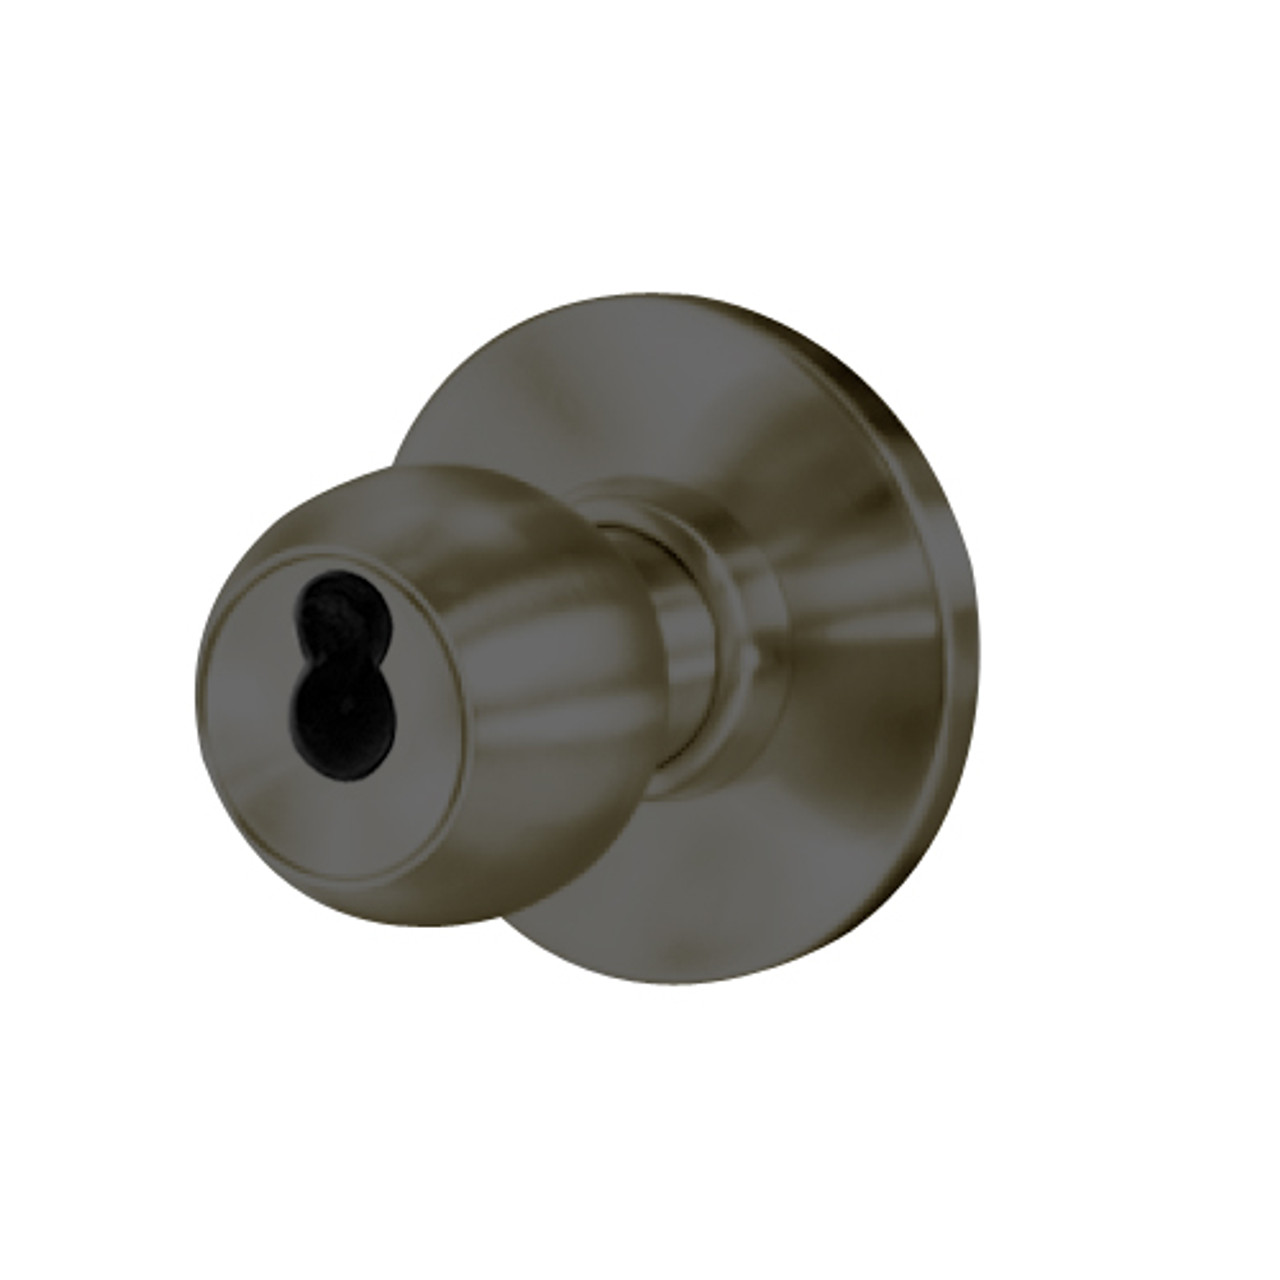 8K37C4AS3613 Best 8K Series Apartment Heavy Duty Cylindrical Knob Locks with Round Style in Oil Rubbed Bronze